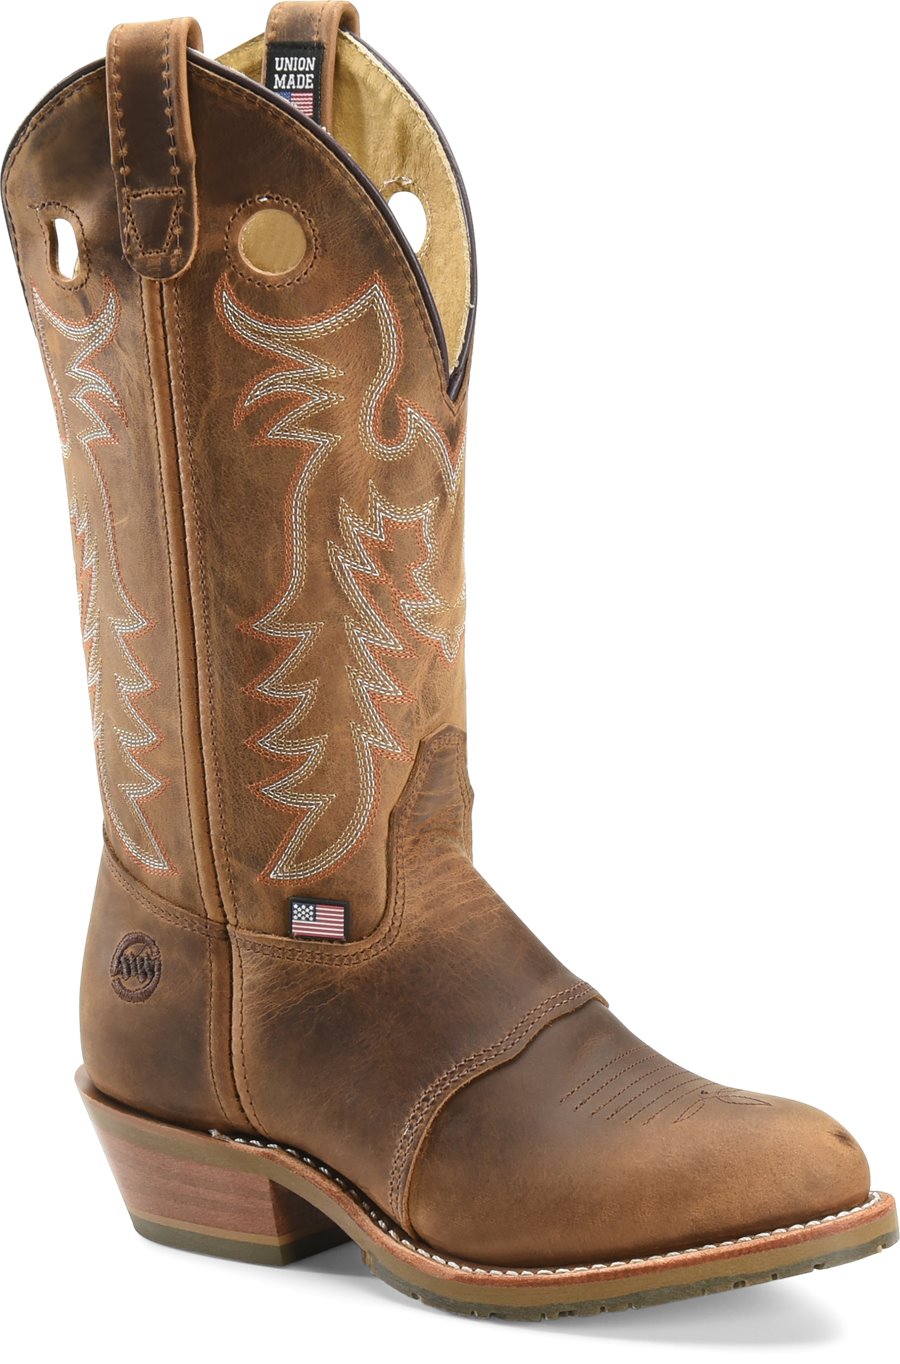 Double H Boot Shoes - Double H Boot 12 Inch UltraGel Buckaroo Women's Shoes in Medium/Brown color. - #doublehbootshoes #shoes